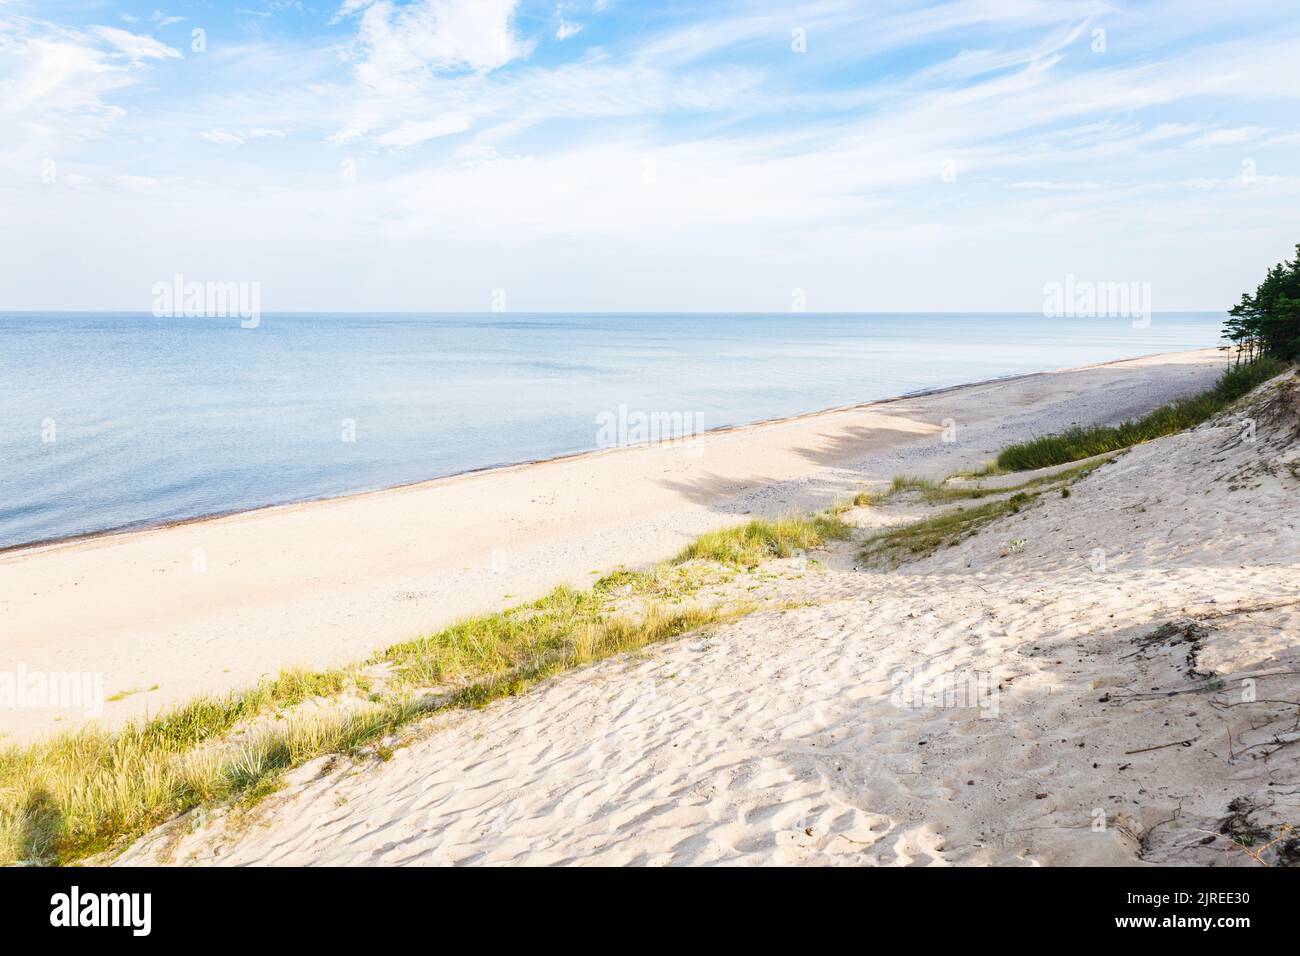 A beautiful landscape with beach and sand dunes near the Baltic sea Stock Photo